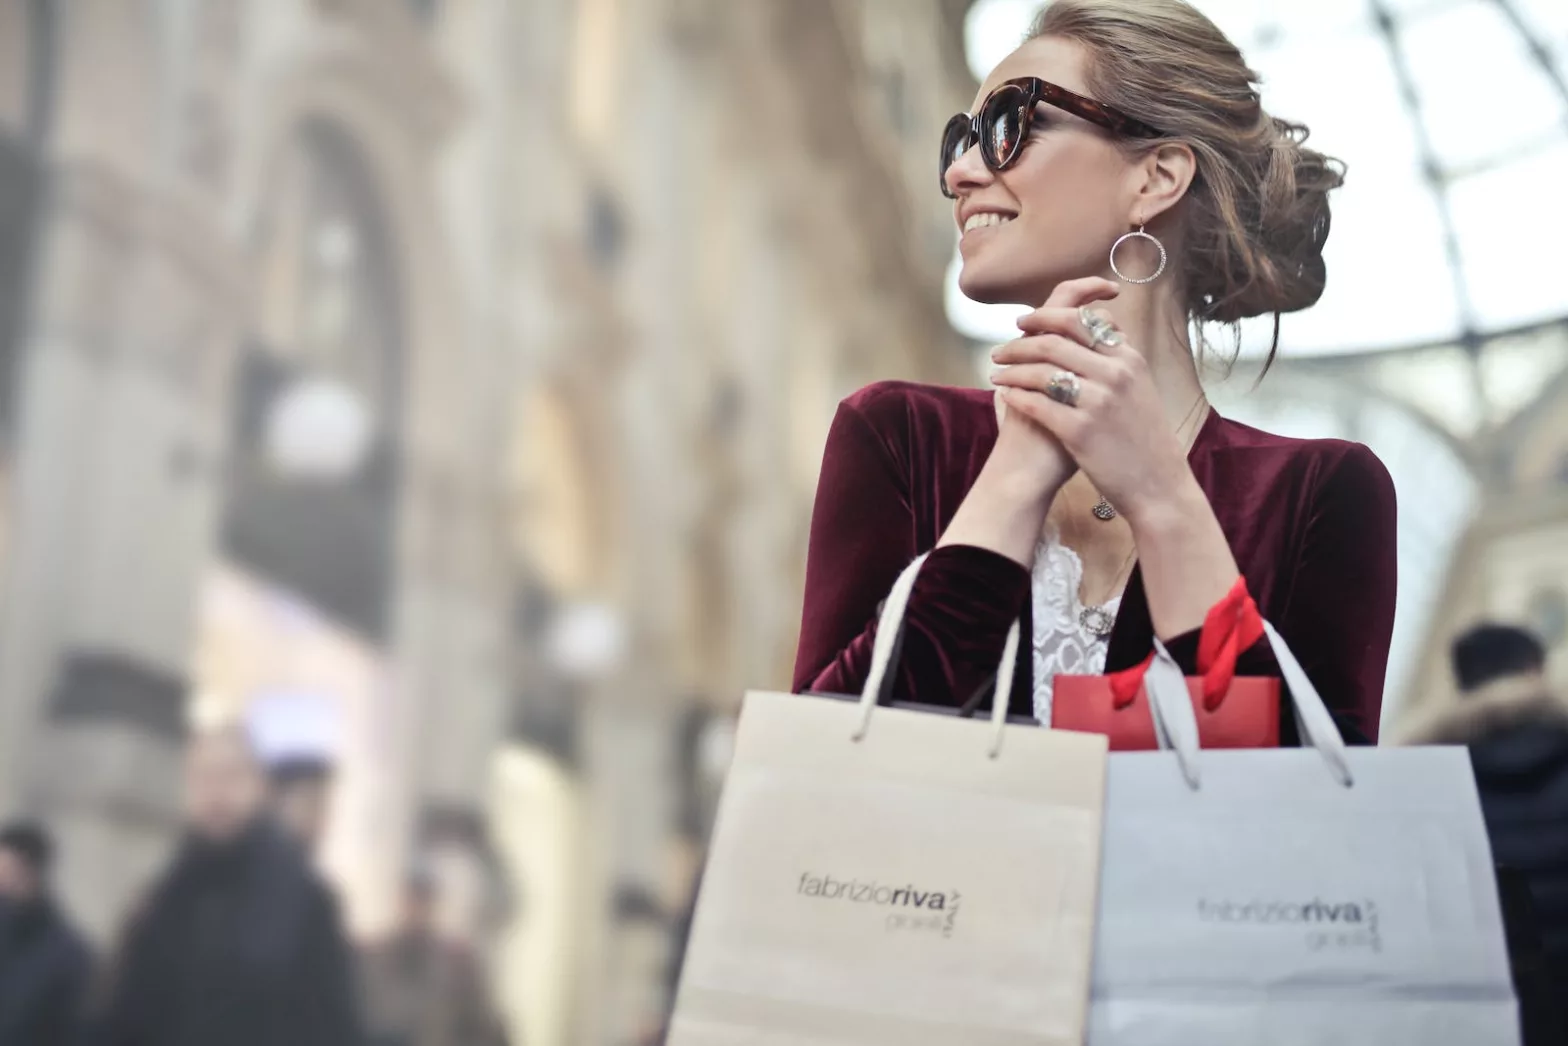 Photo of a Woman Holding Brand Shopping Bags